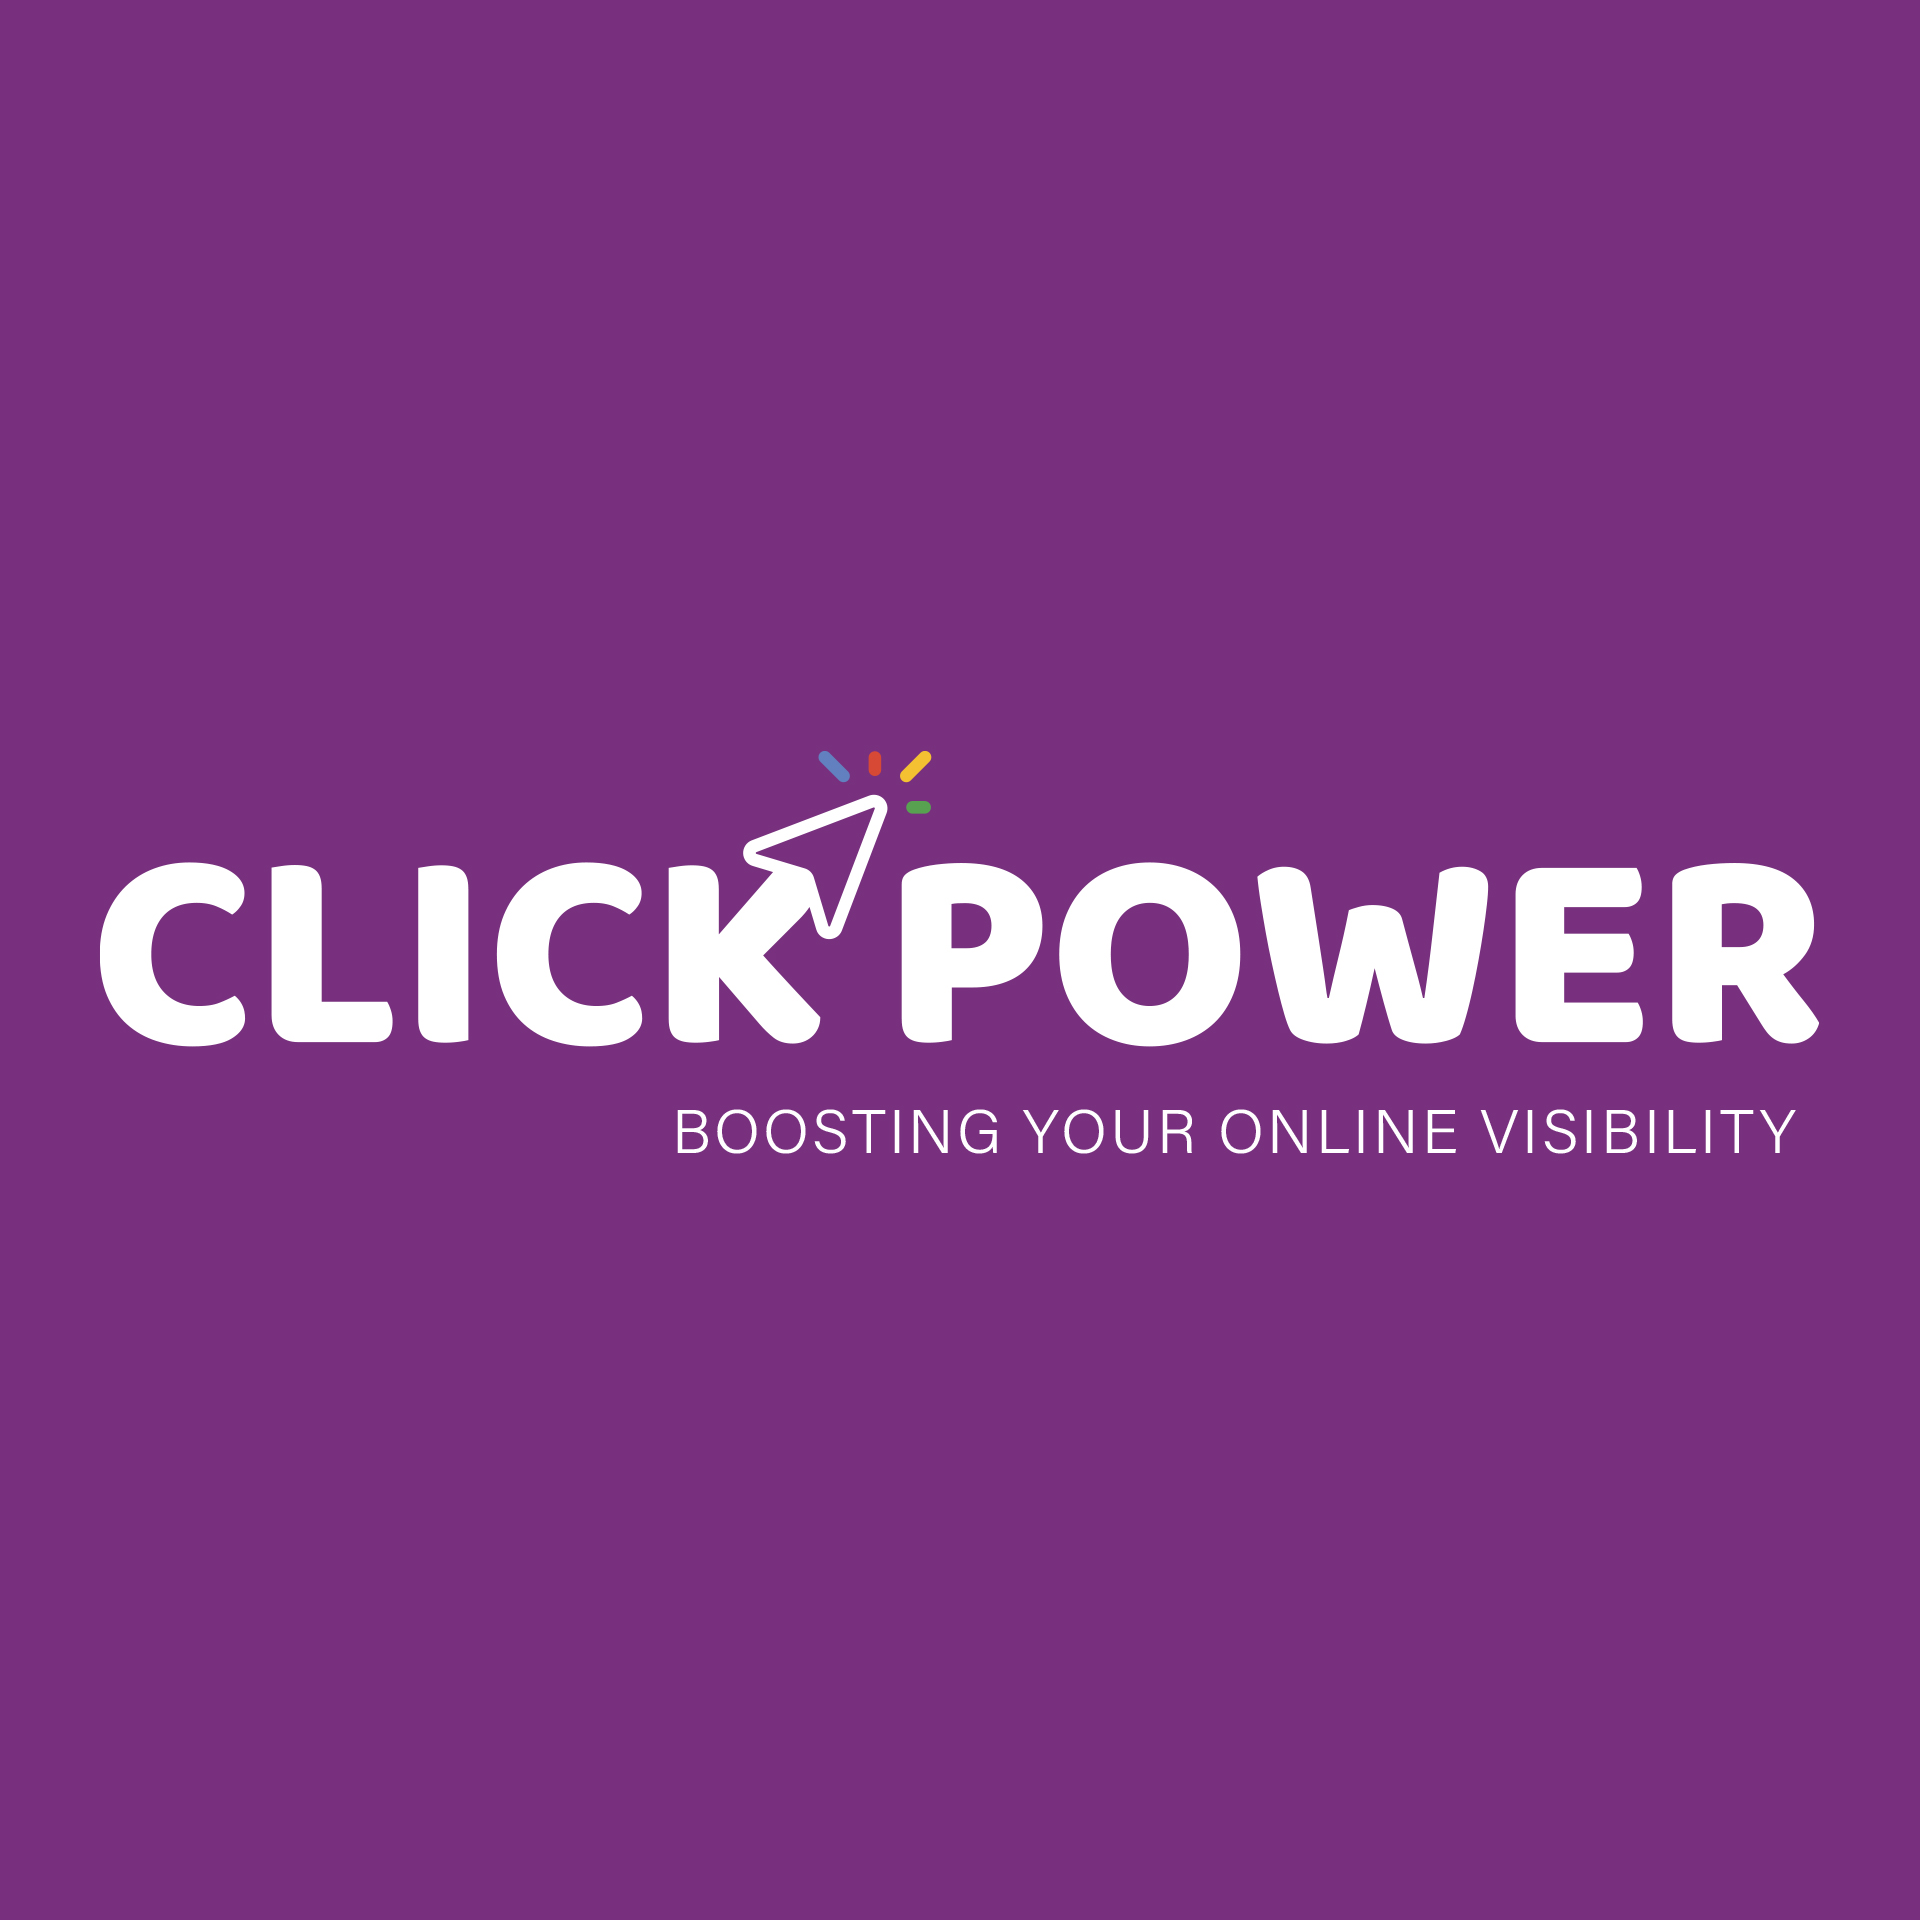 Images ClickPower